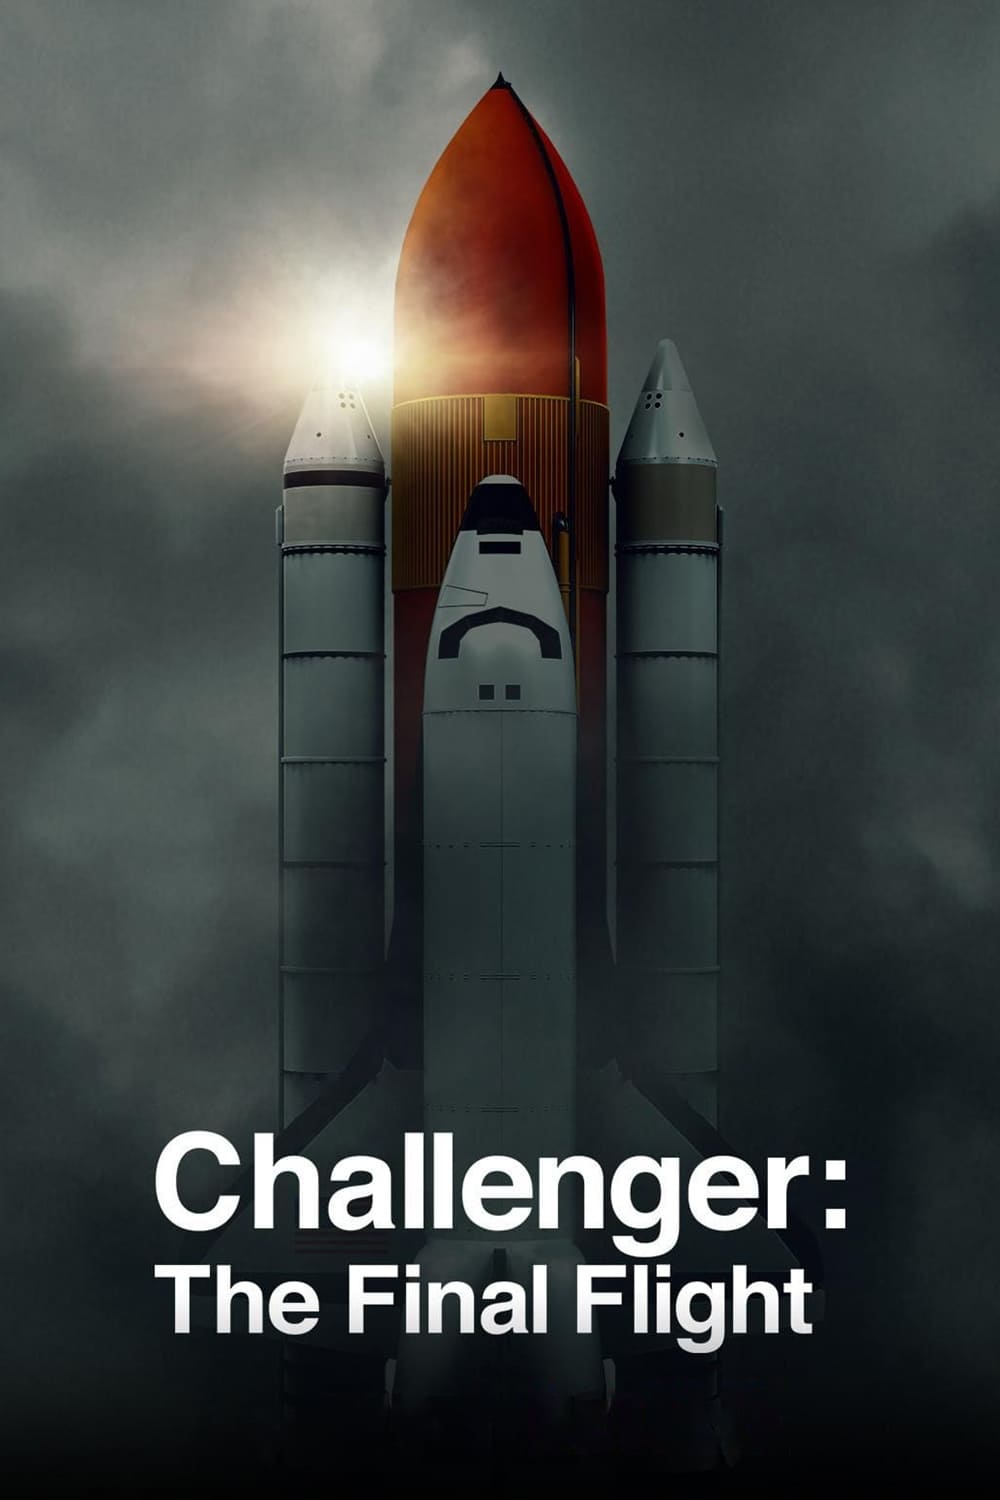 Challenger: The Final Flight TV Shows About Challenge